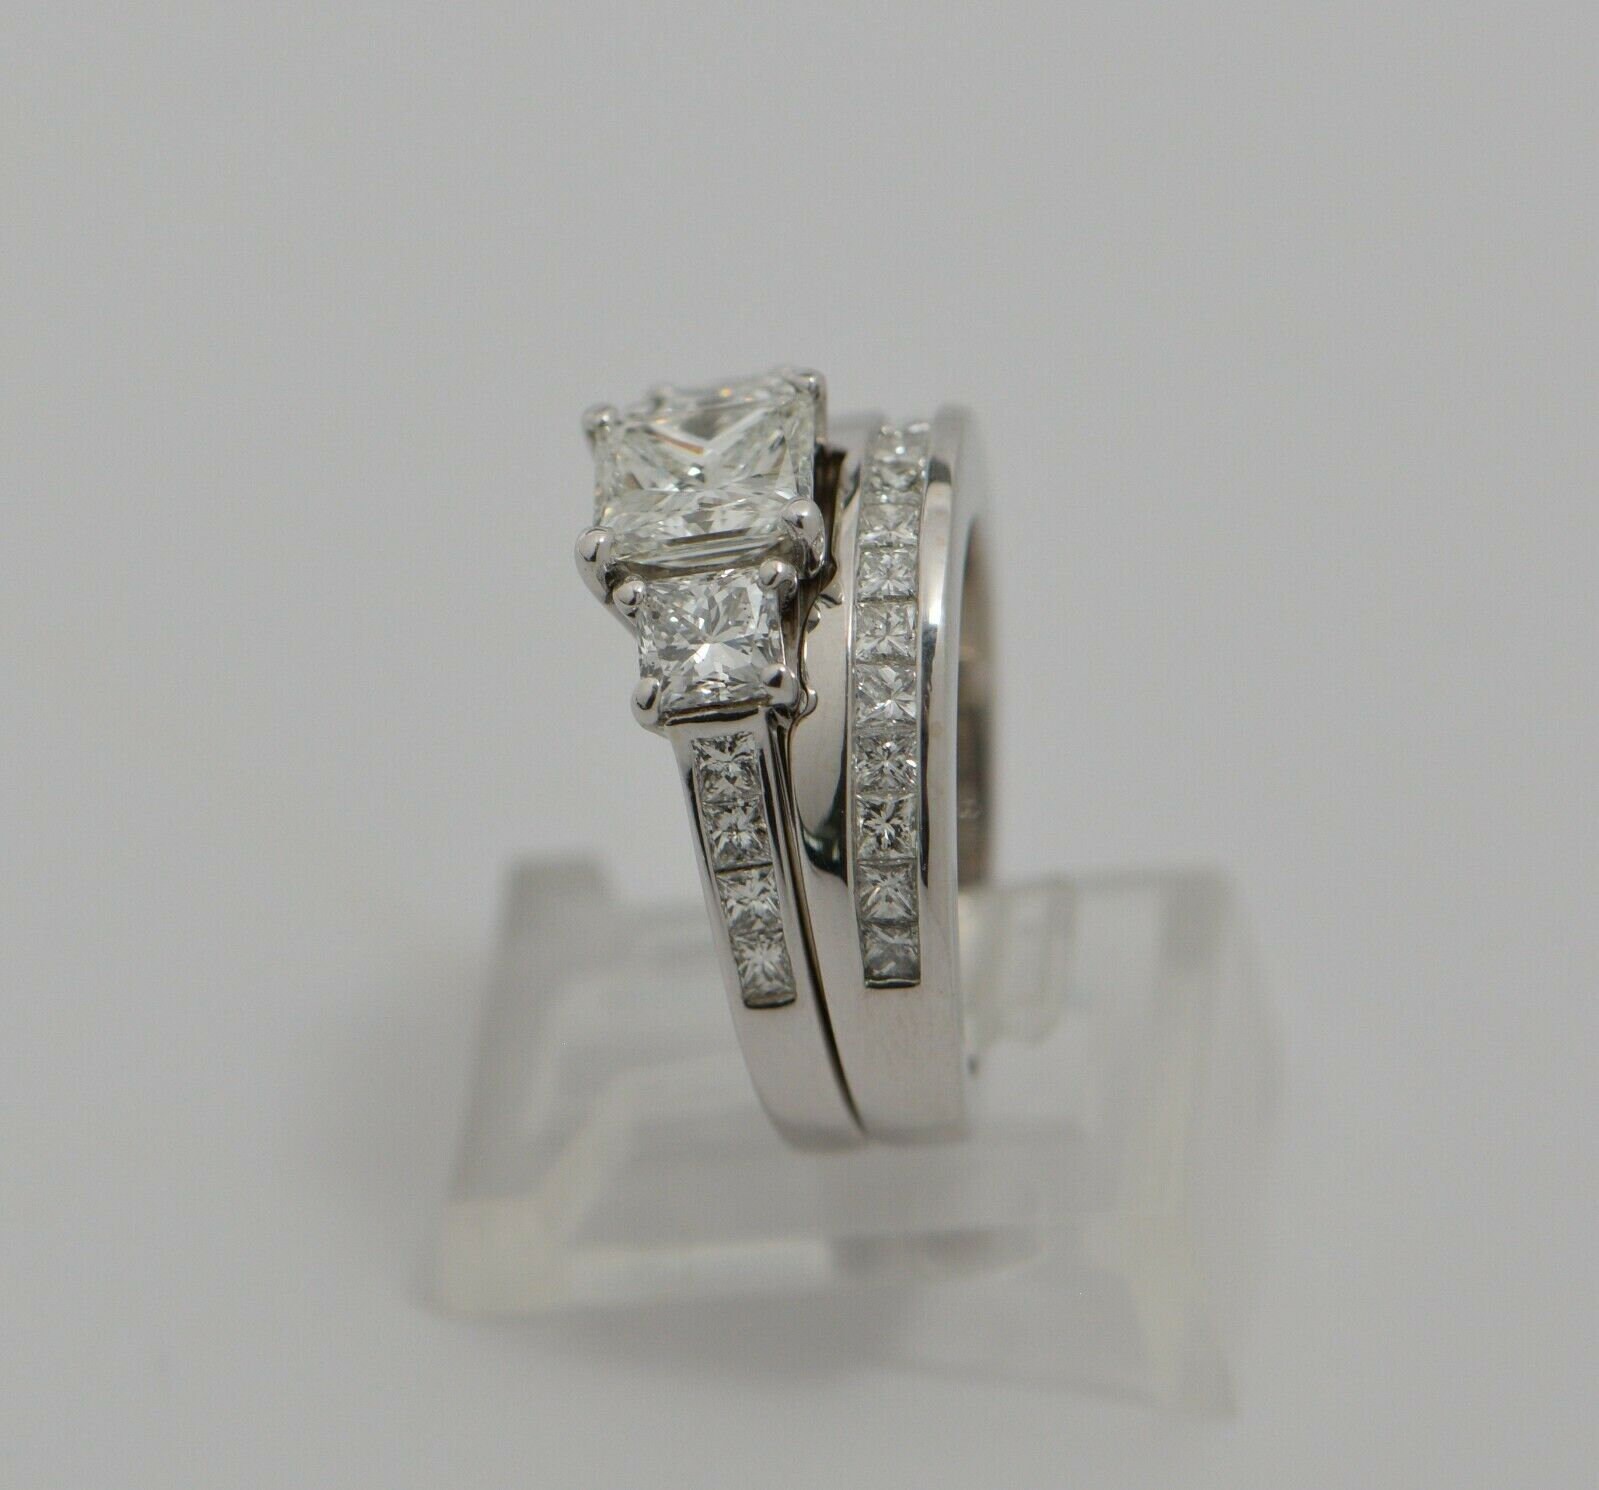 14K White Gold Princess Diamond Ring & Guard Ring Sizes 7 and 7.5 -  Colonial Trading Company